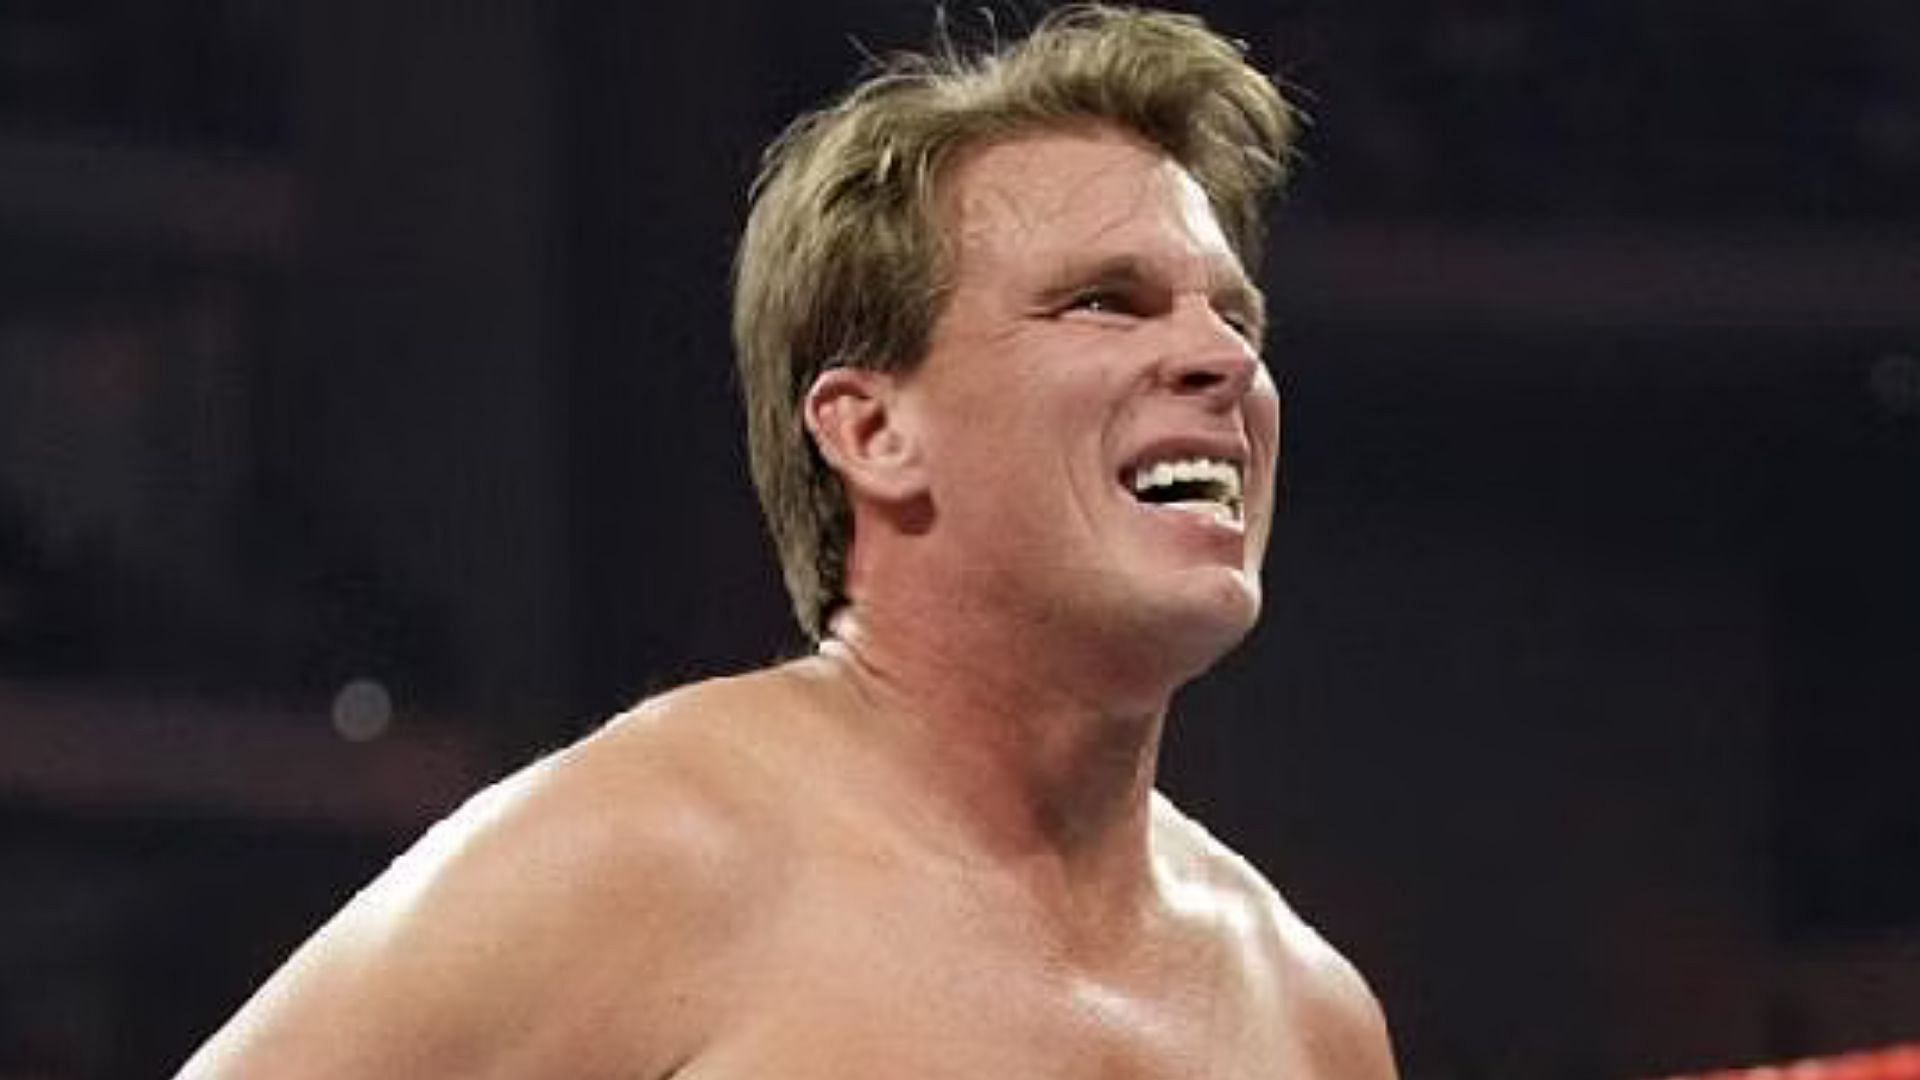 JBL was able to win the WWE Championship before retiring